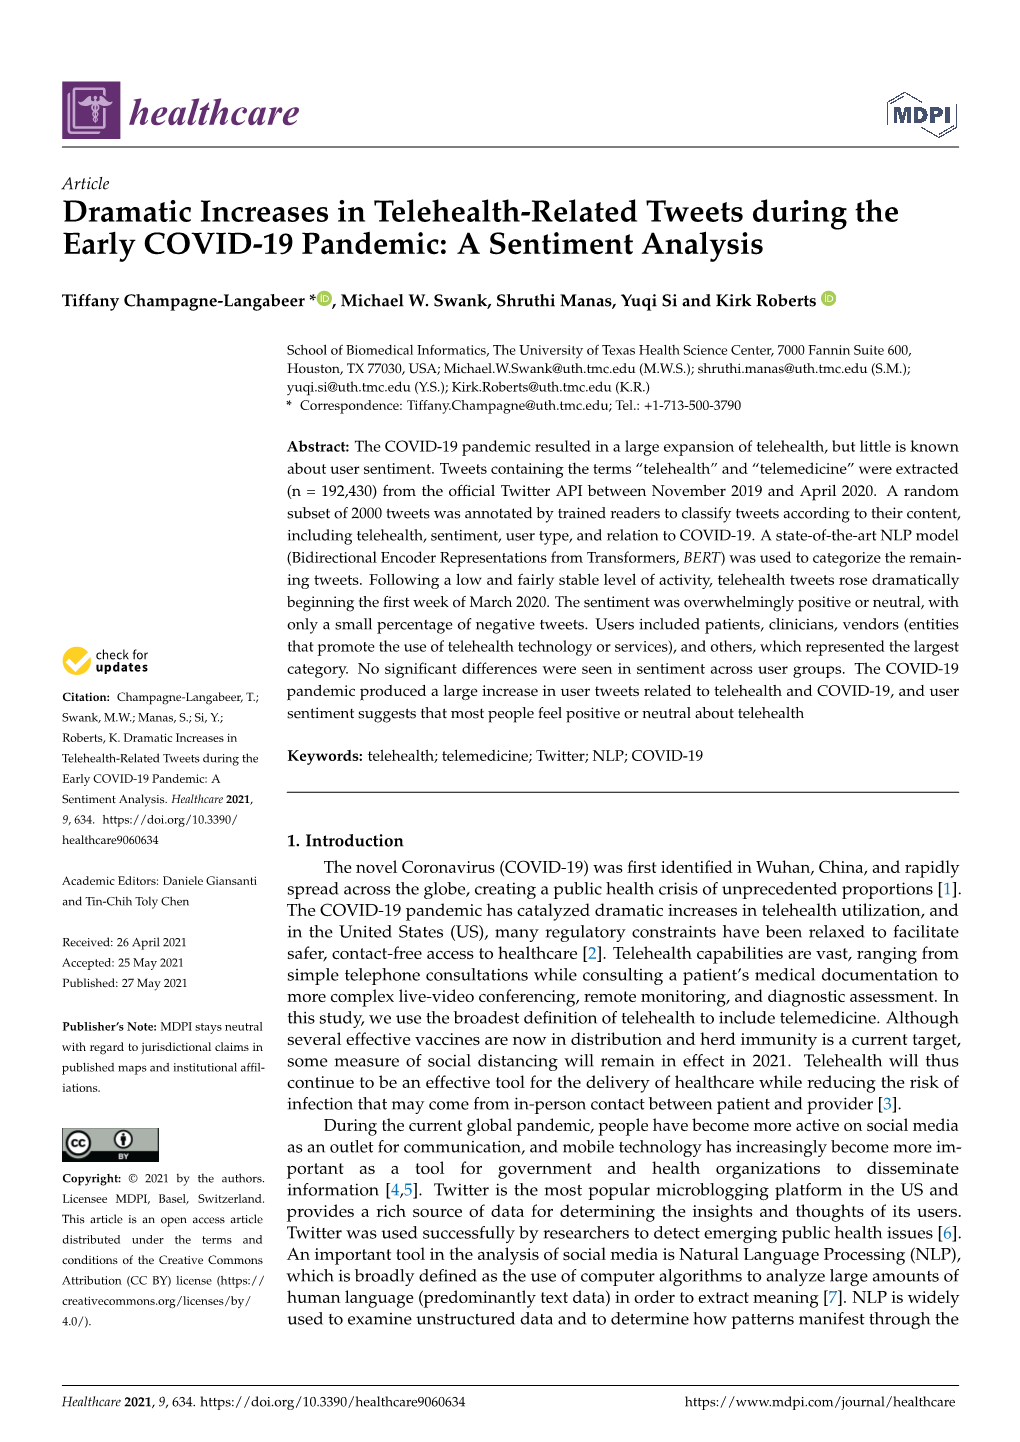 Dramatic Increases in Telehealth-Related Tweets During the Early COVID-19 Pandemic: a Sentiment Analysis